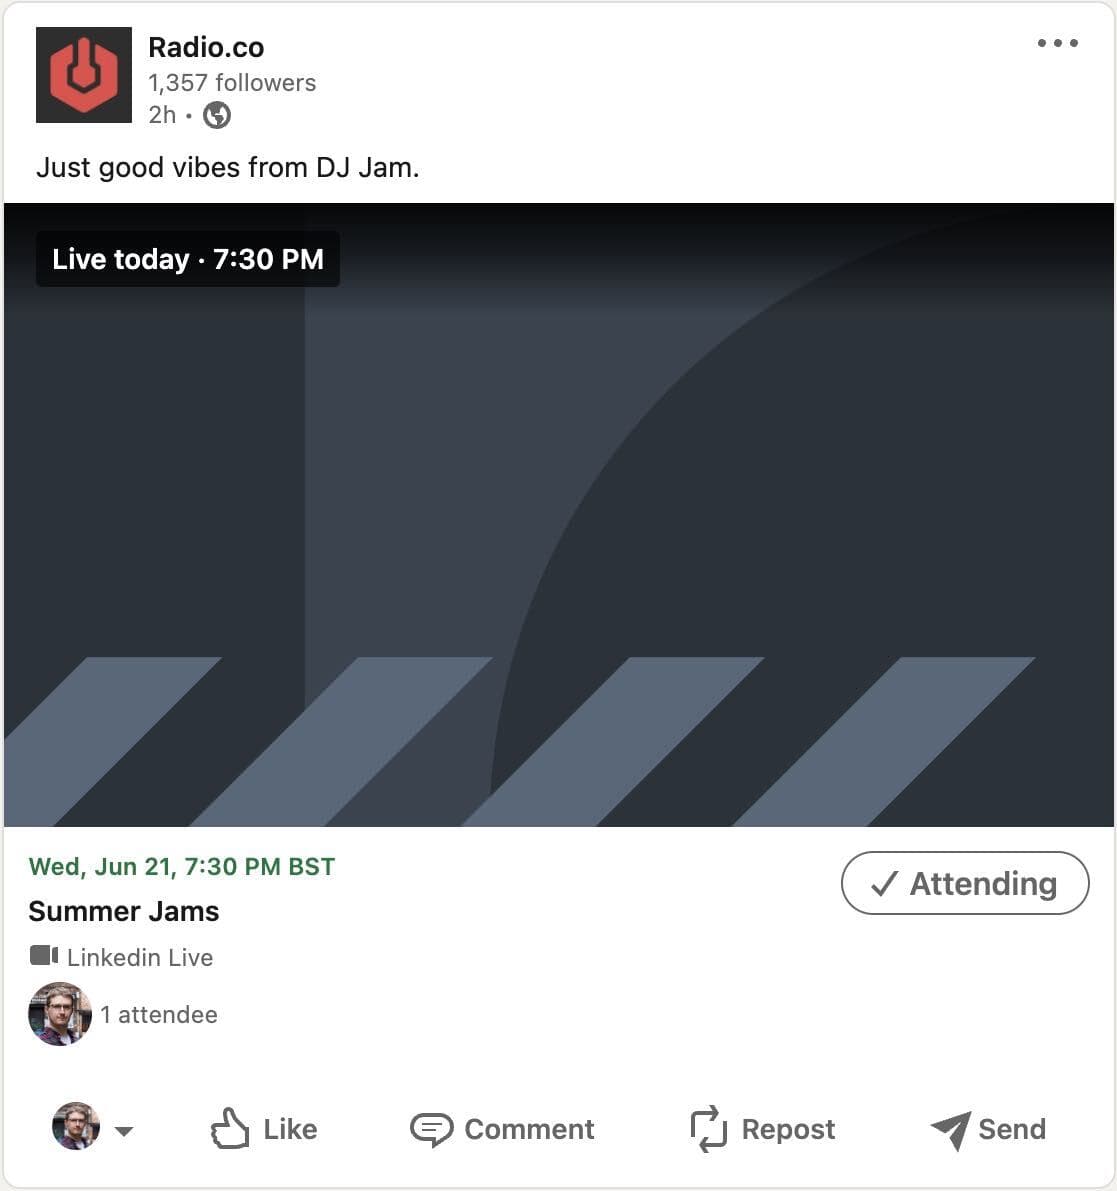 A scheduled event on LinkedIn.